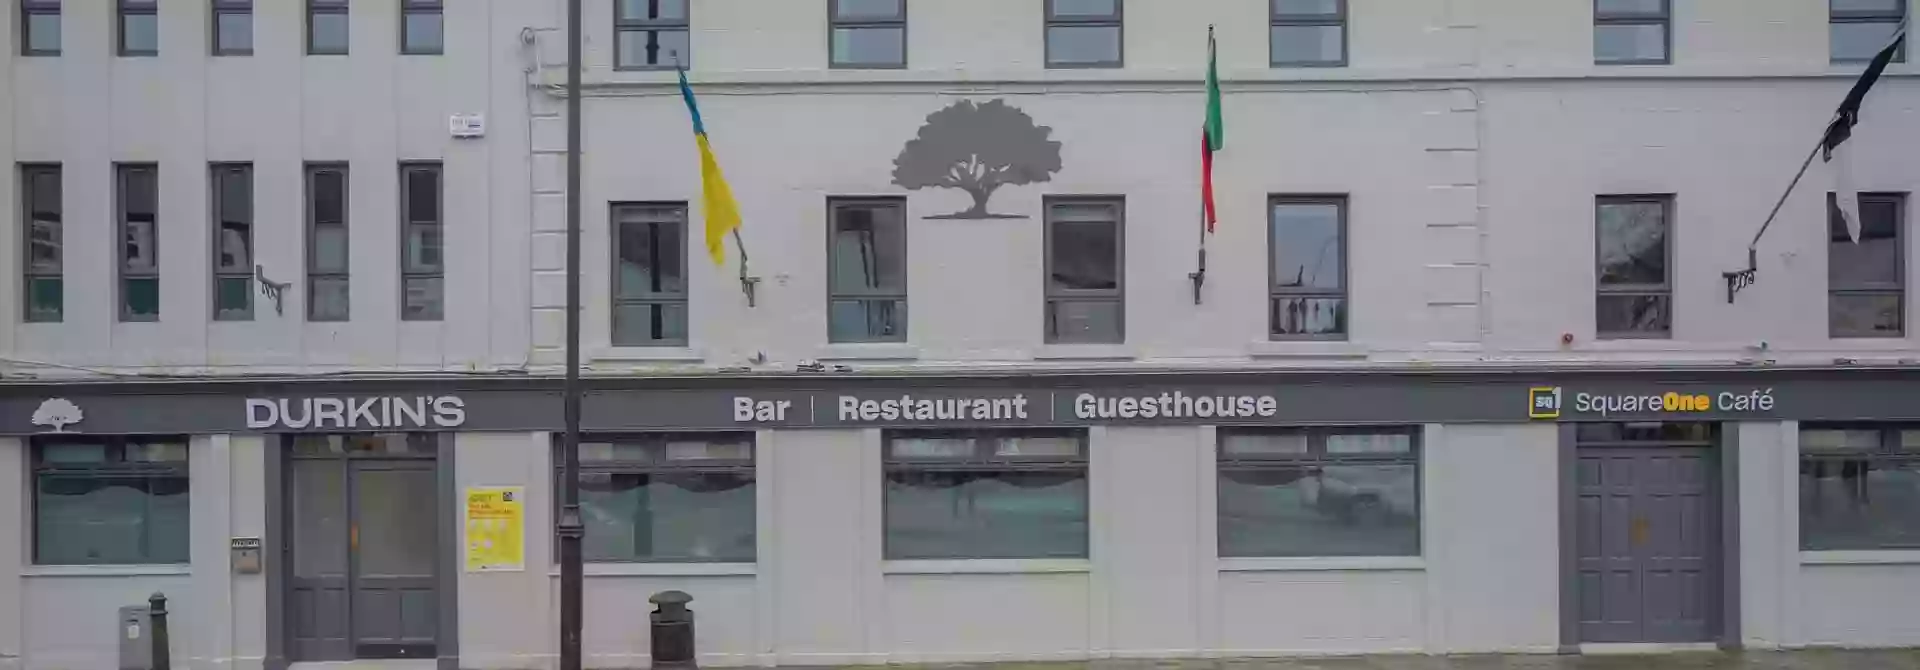 Durkin's Bar & Restaurant, Guesthouse & Square 1 Cafe